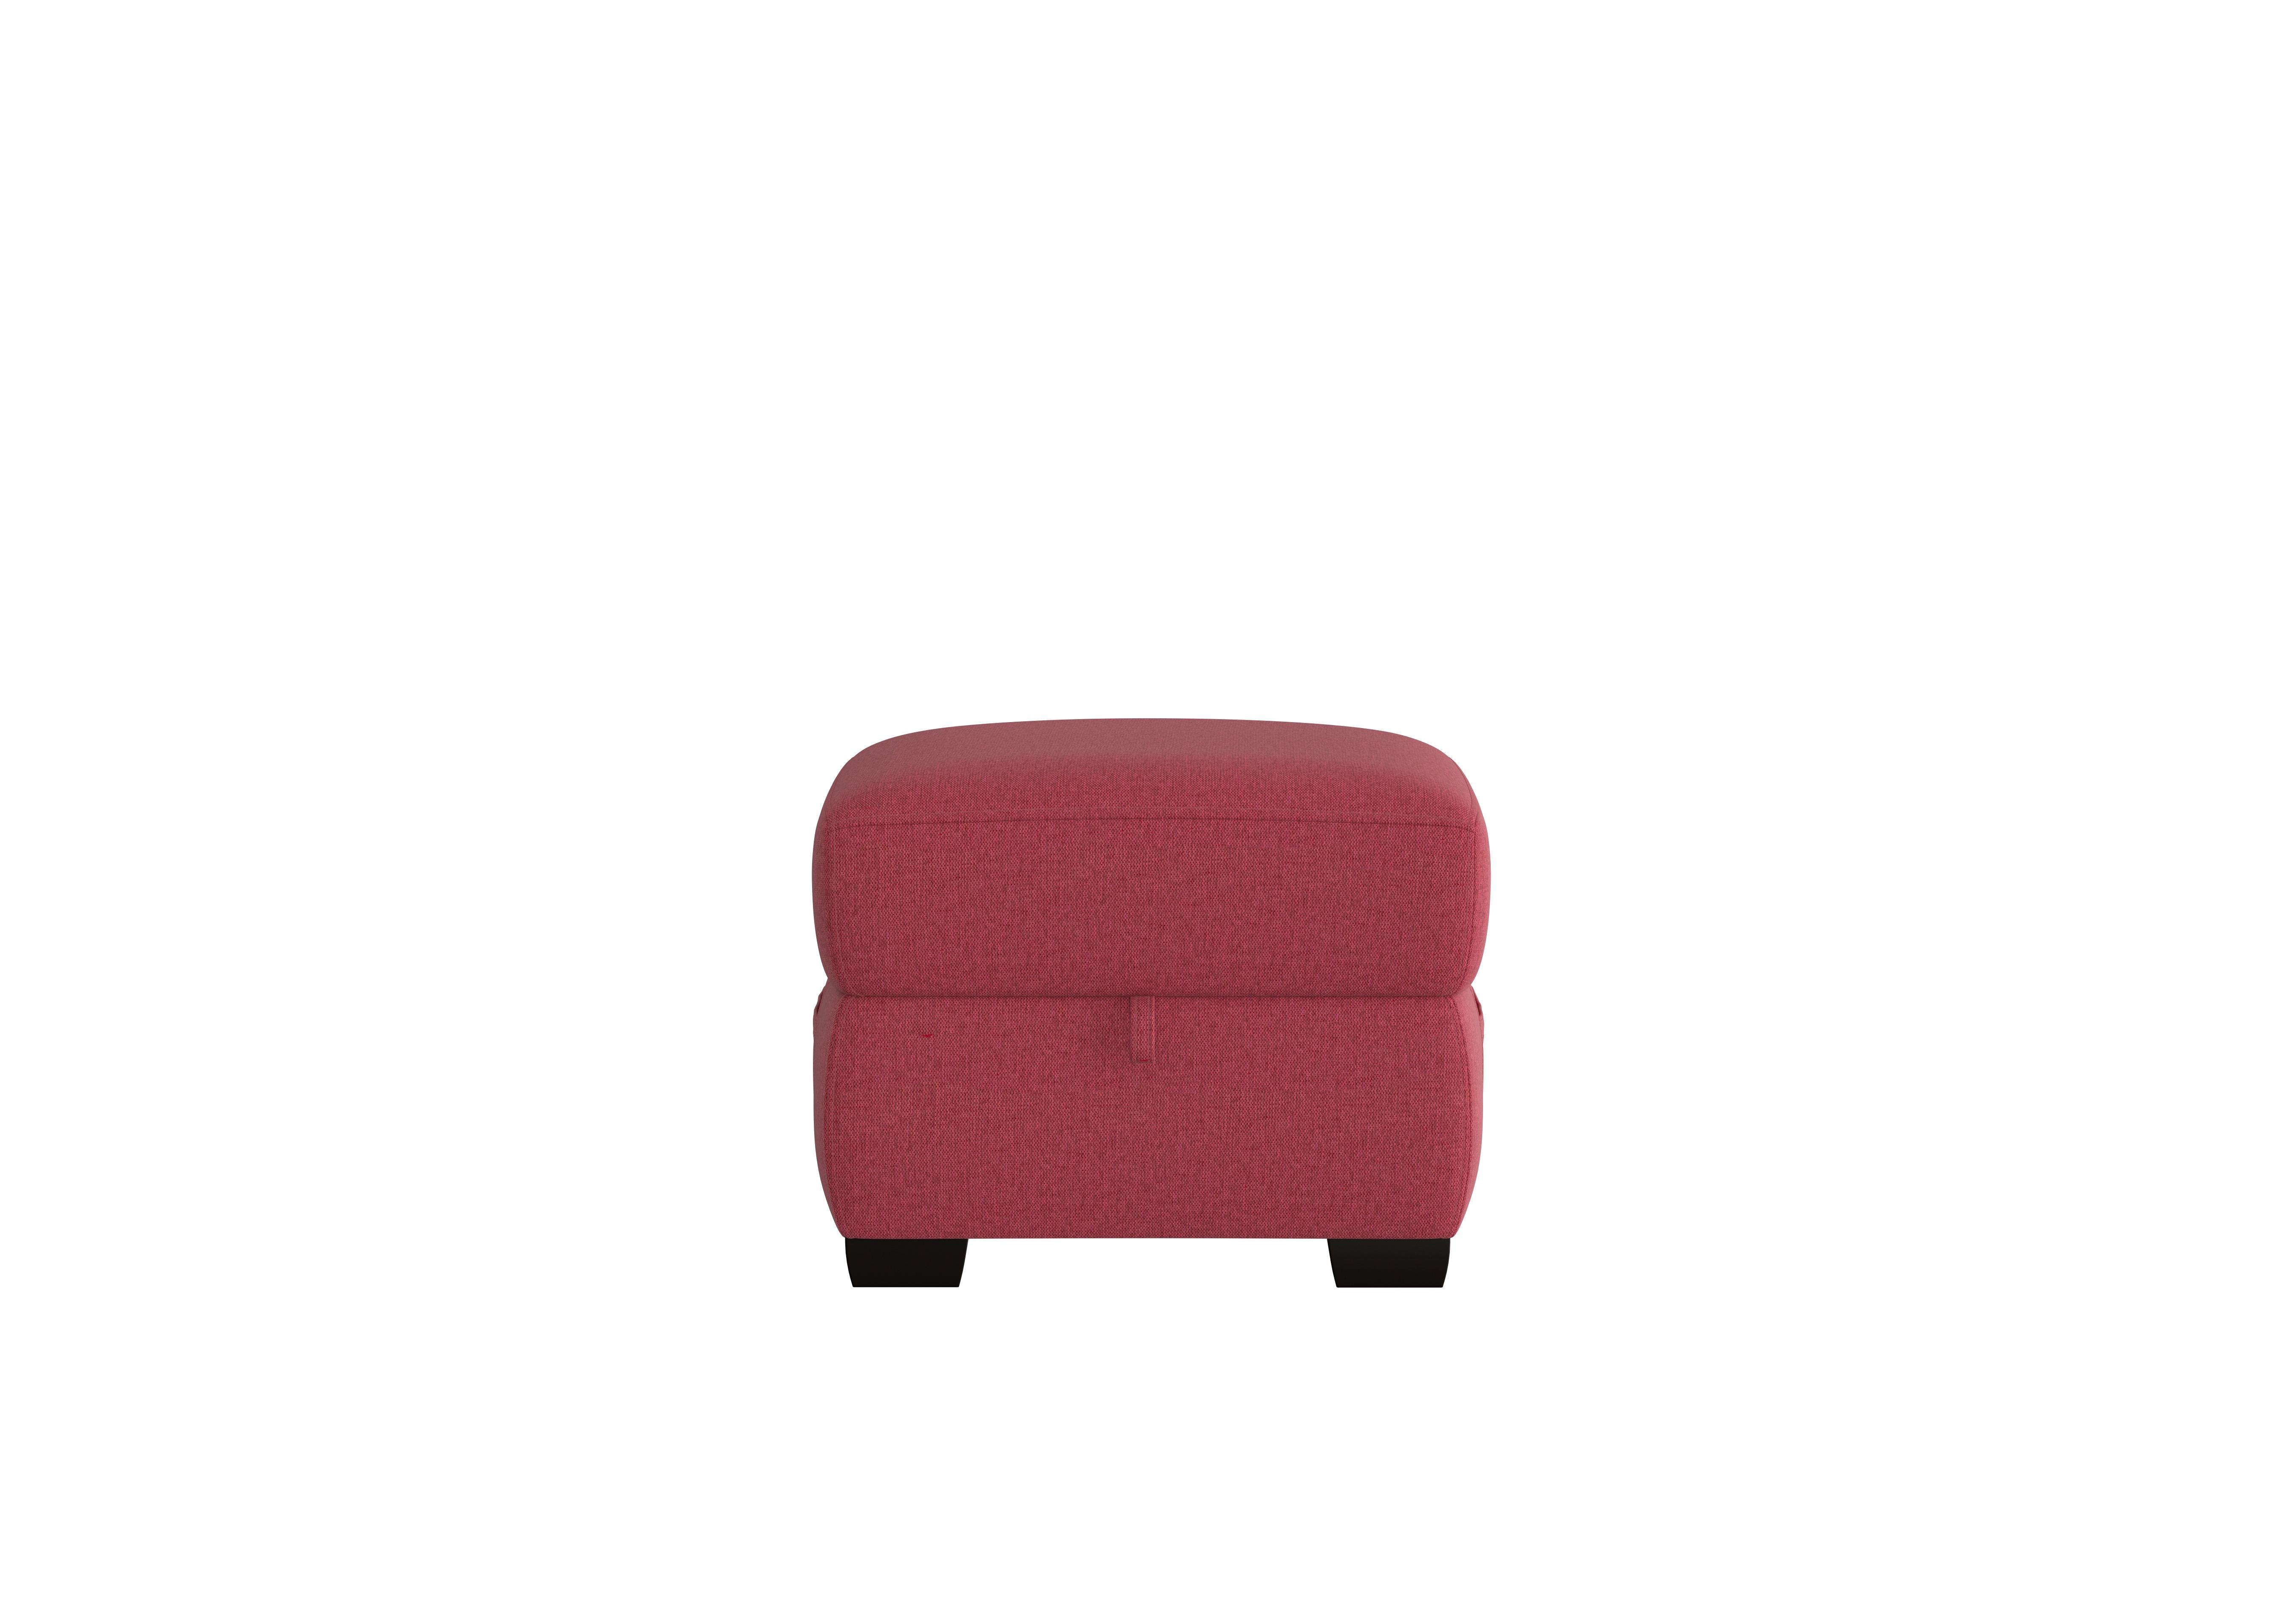 Starlight Express Fabric Storage Footstool in Fab-Blt-R29 Red on Furniture Village